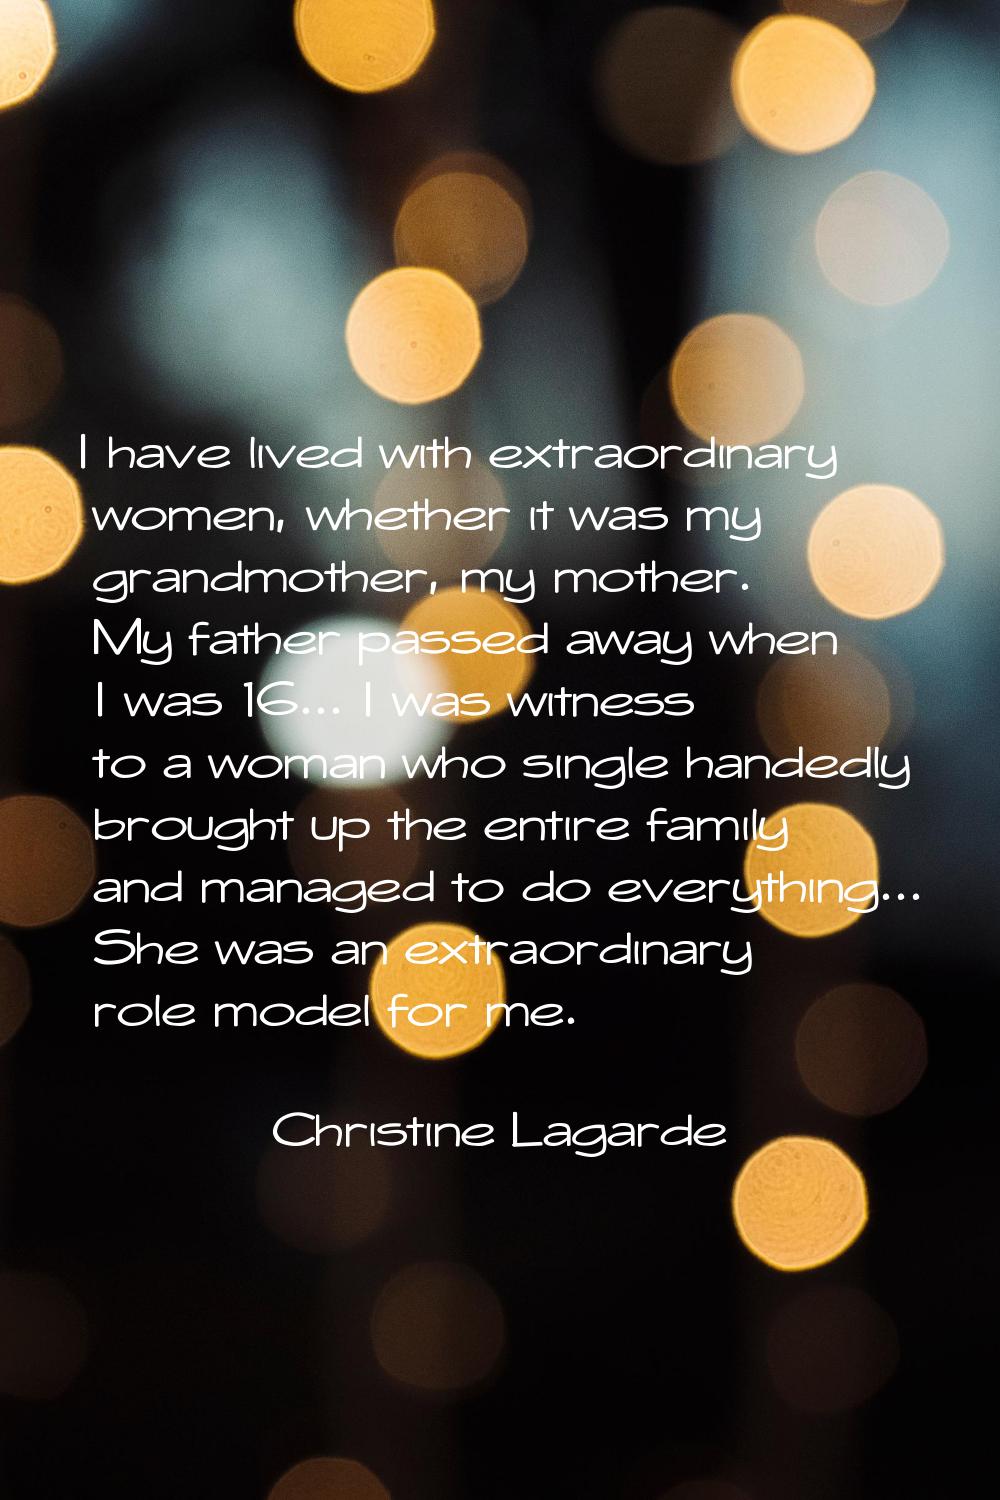 I have lived with extraordinary women, whether it was my grandmother, my mother. My father passed a